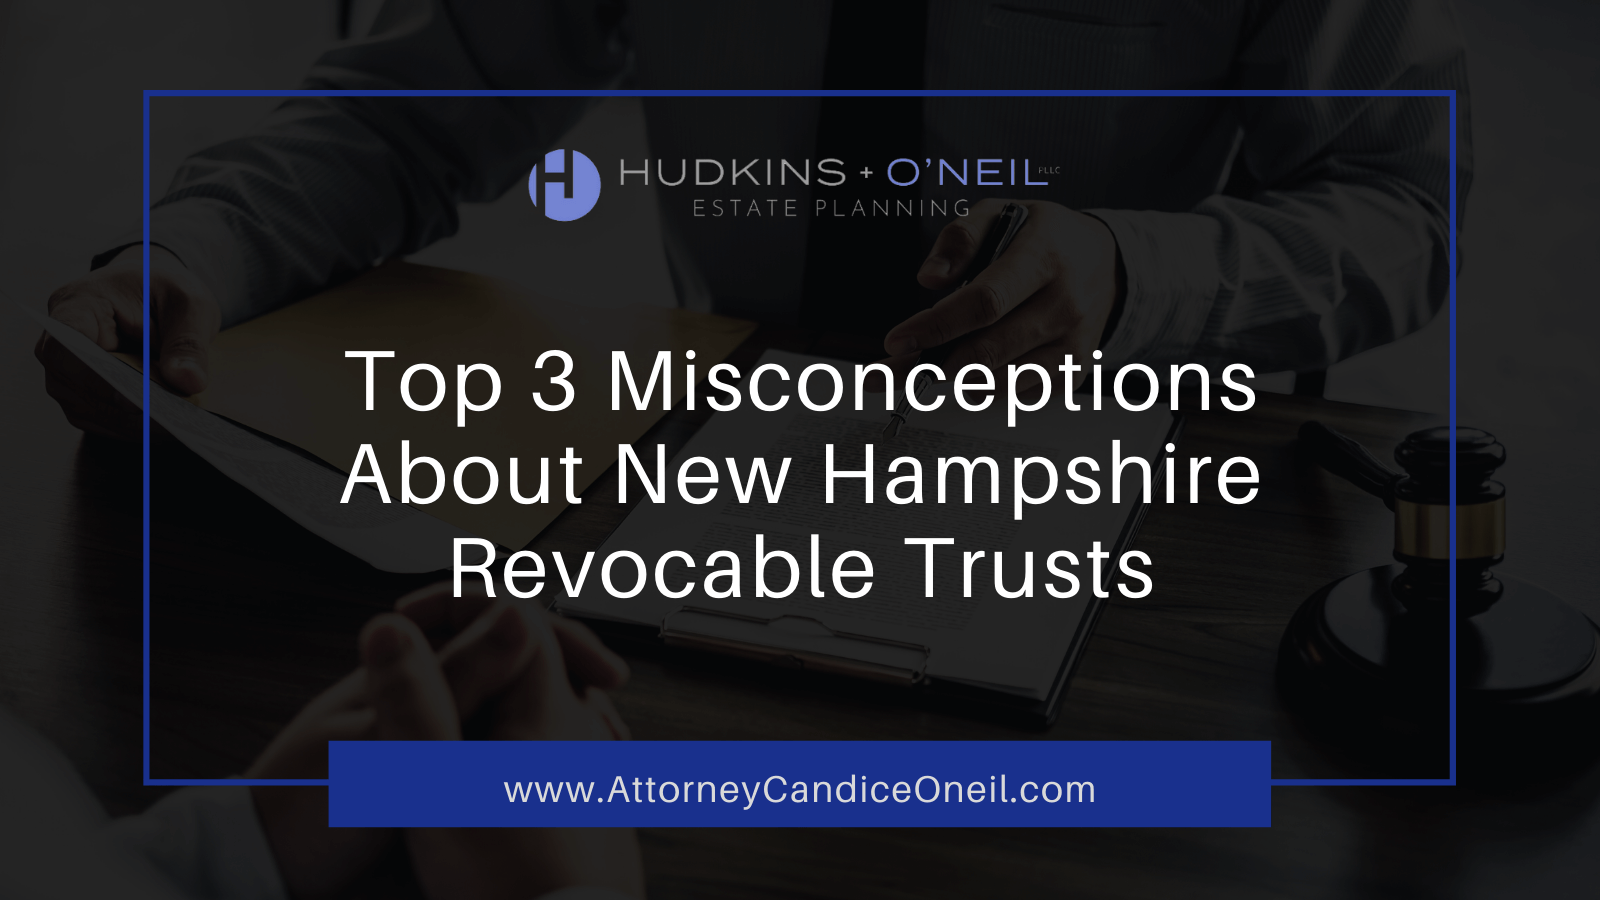 Top 3 Misconceptions About New Hampshire Revocable Trusts - candice oneil estate planning - new hampshire